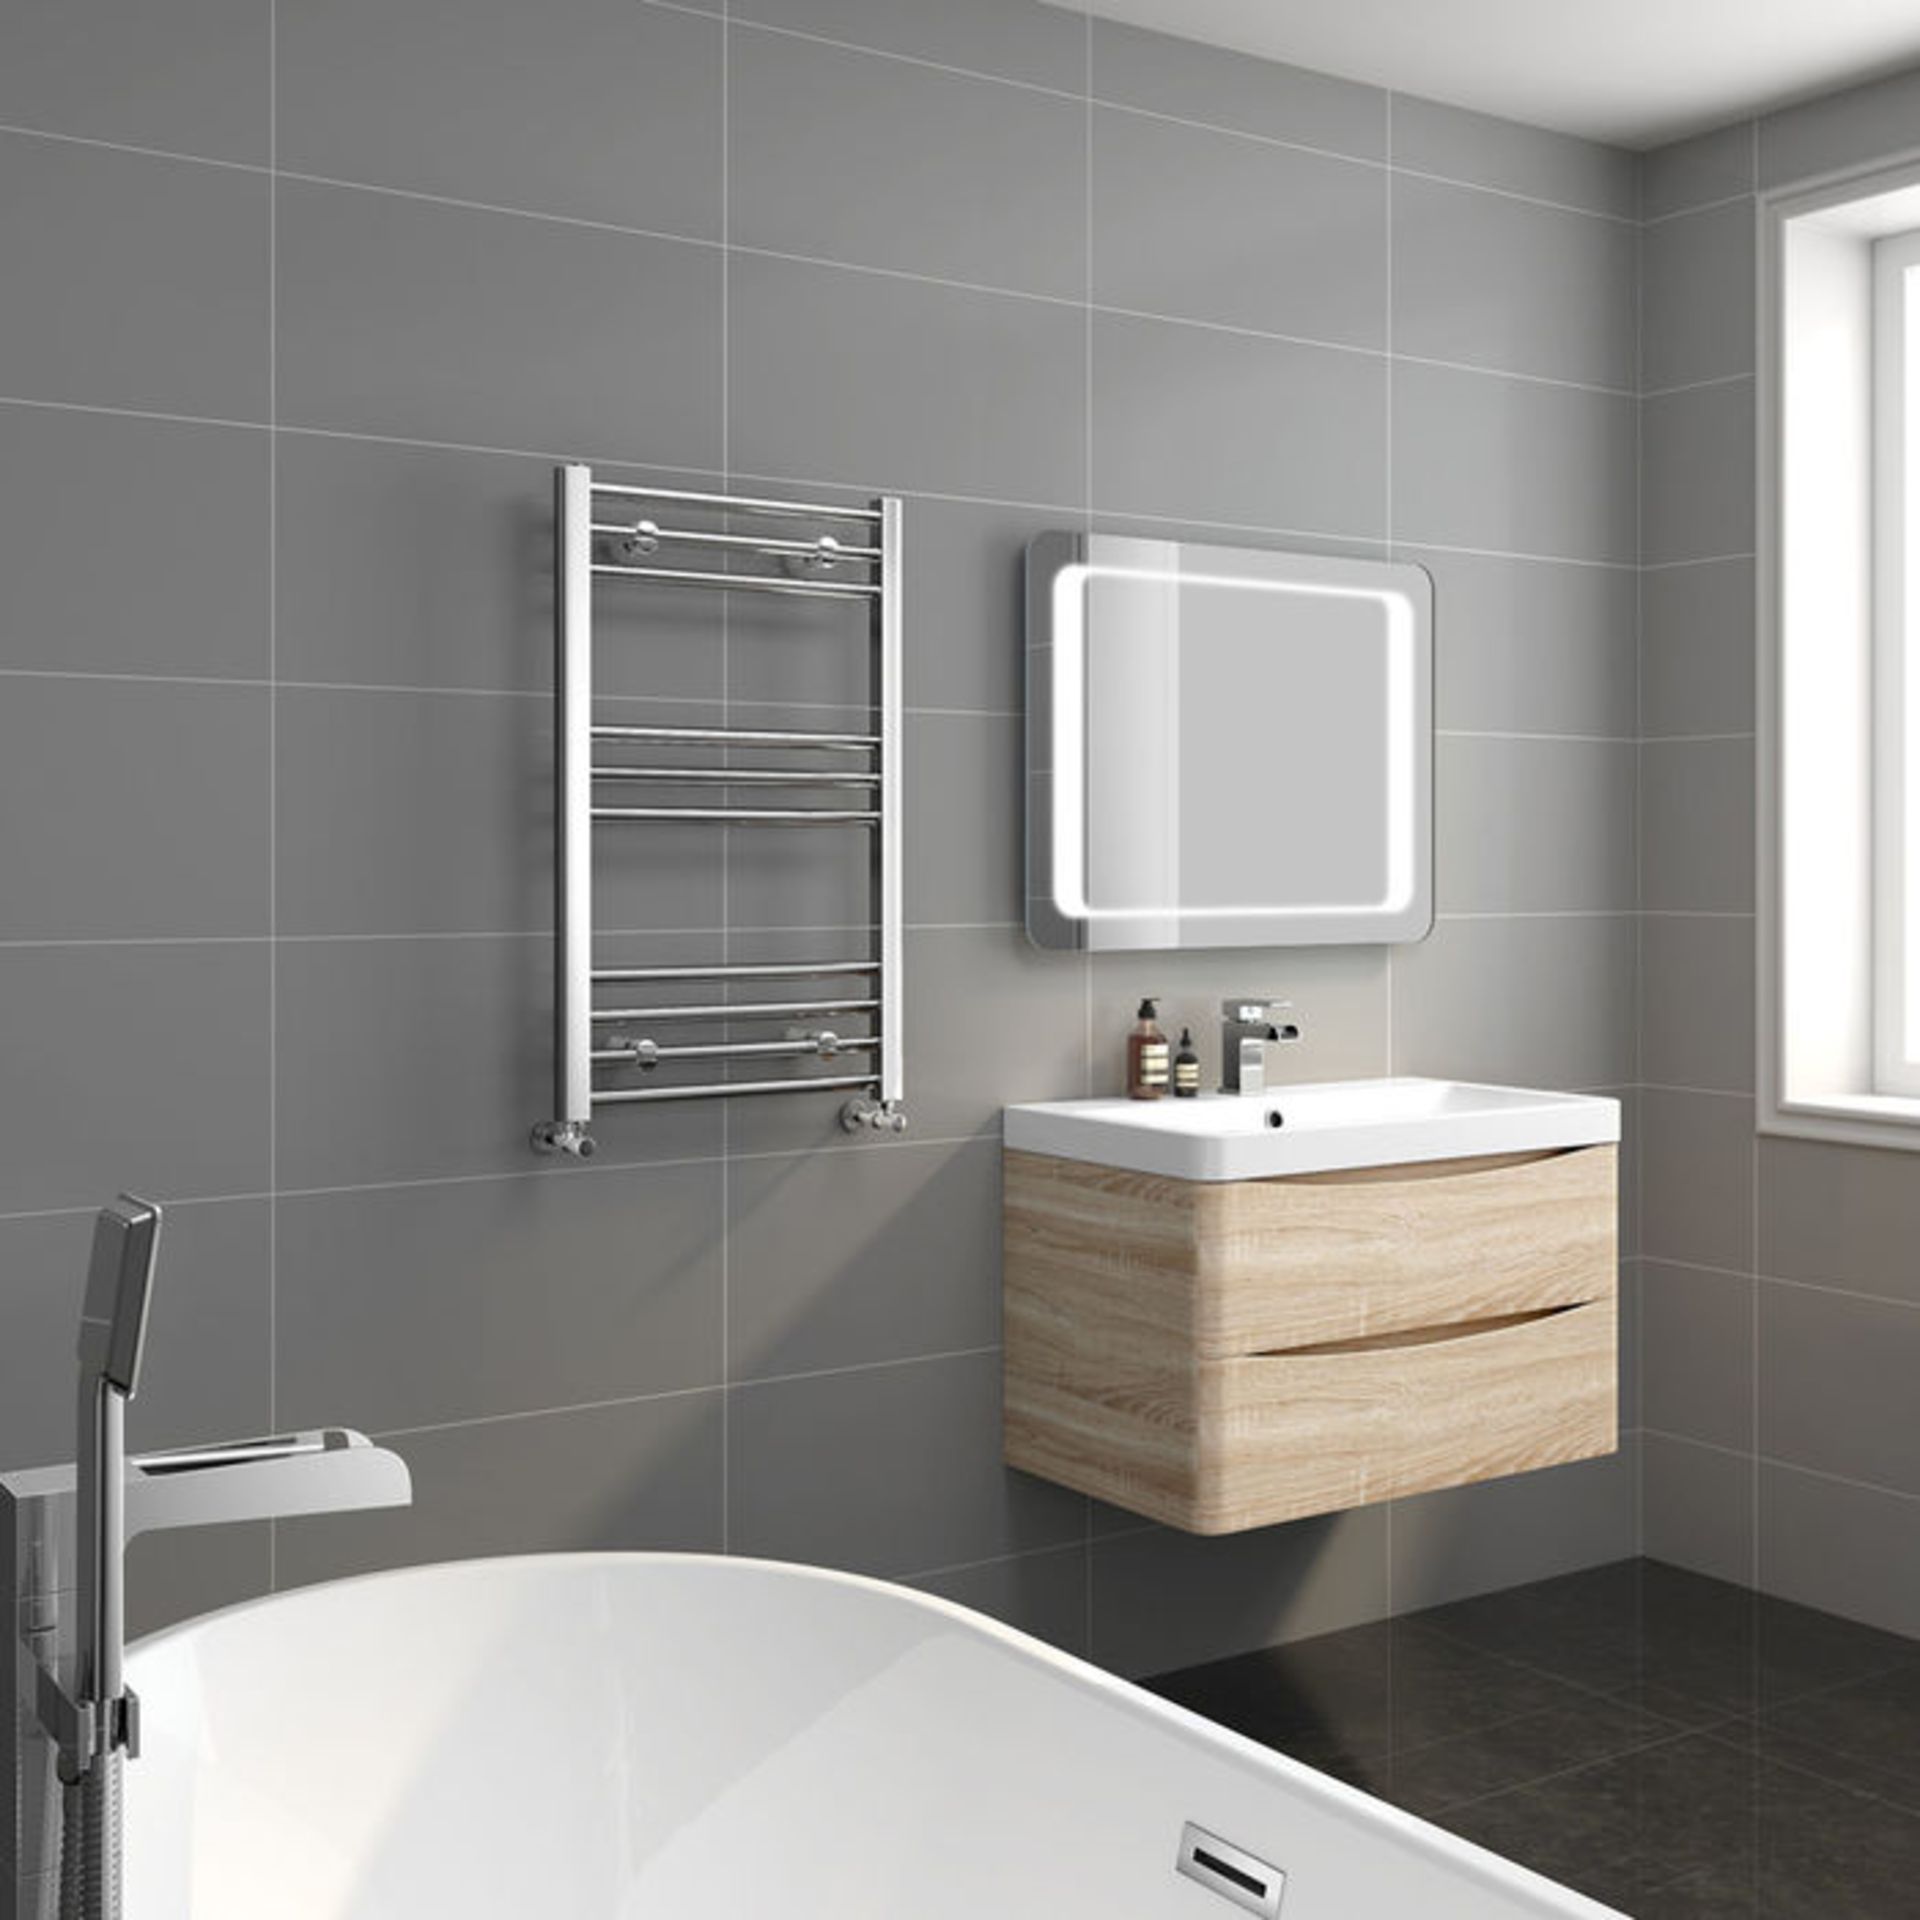 (L74) 800x500mm - 20mm Tubes - Chrome Heated Straight Rail Ladder Towel Radiator. Low carbon steel - Image 3 of 3